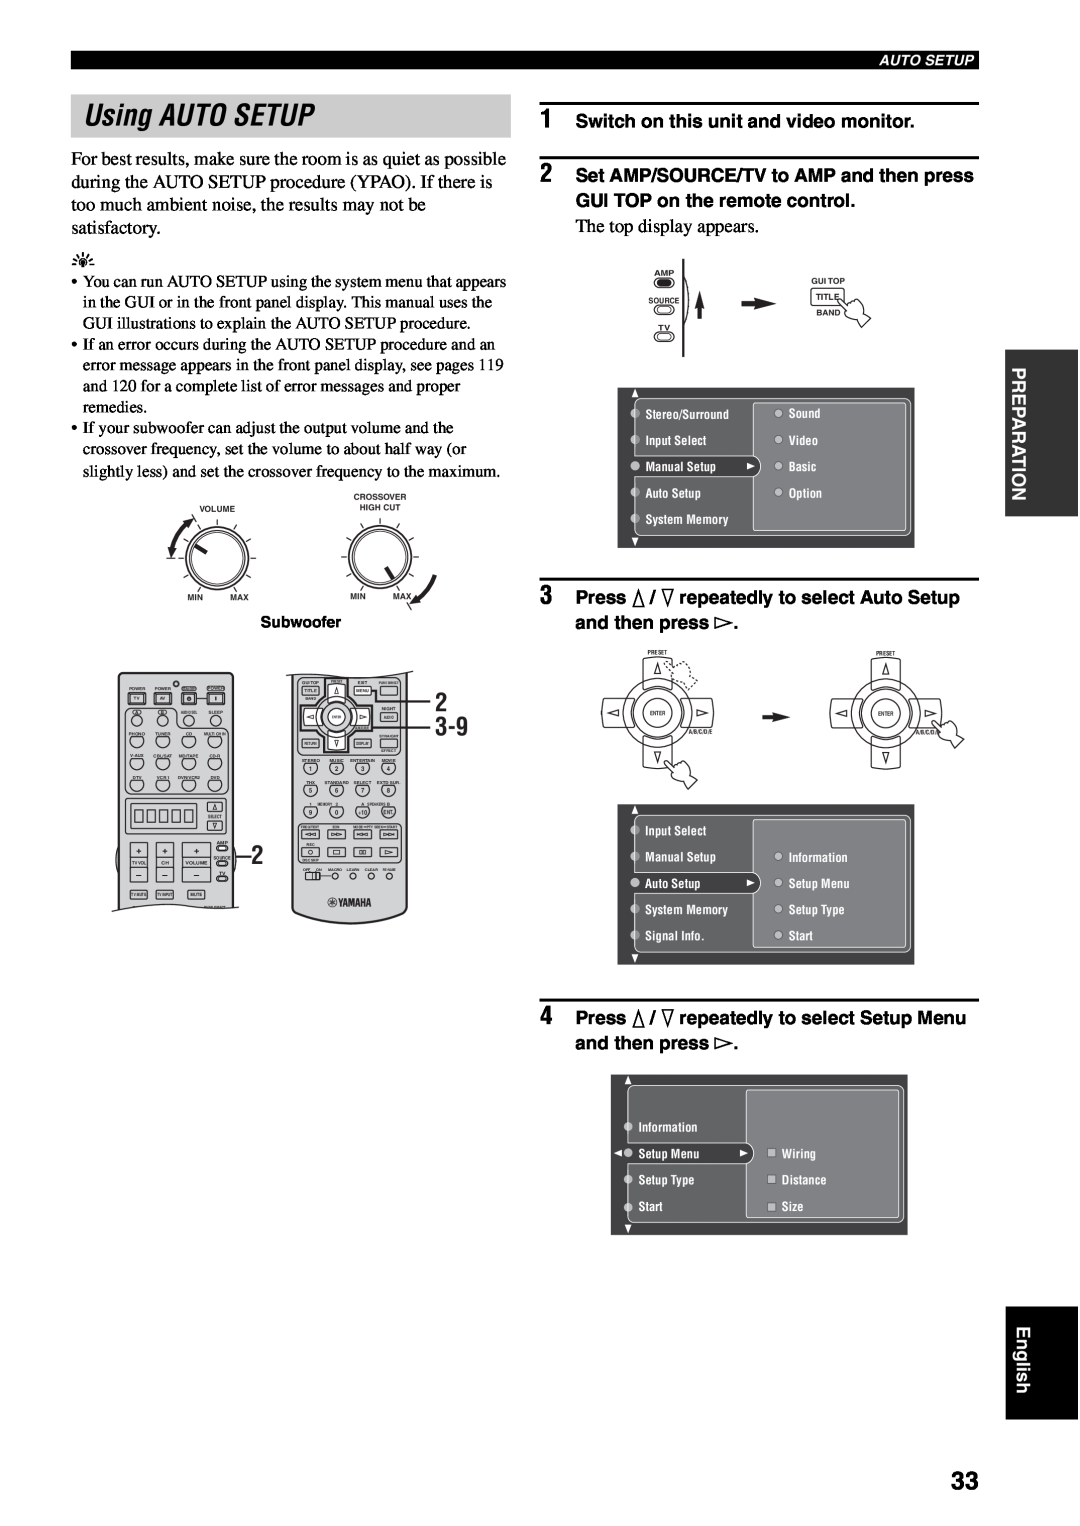 Yamaha RX-V2600 owner manual Using AUTO SETUP, Switch on this unit and video monitor 